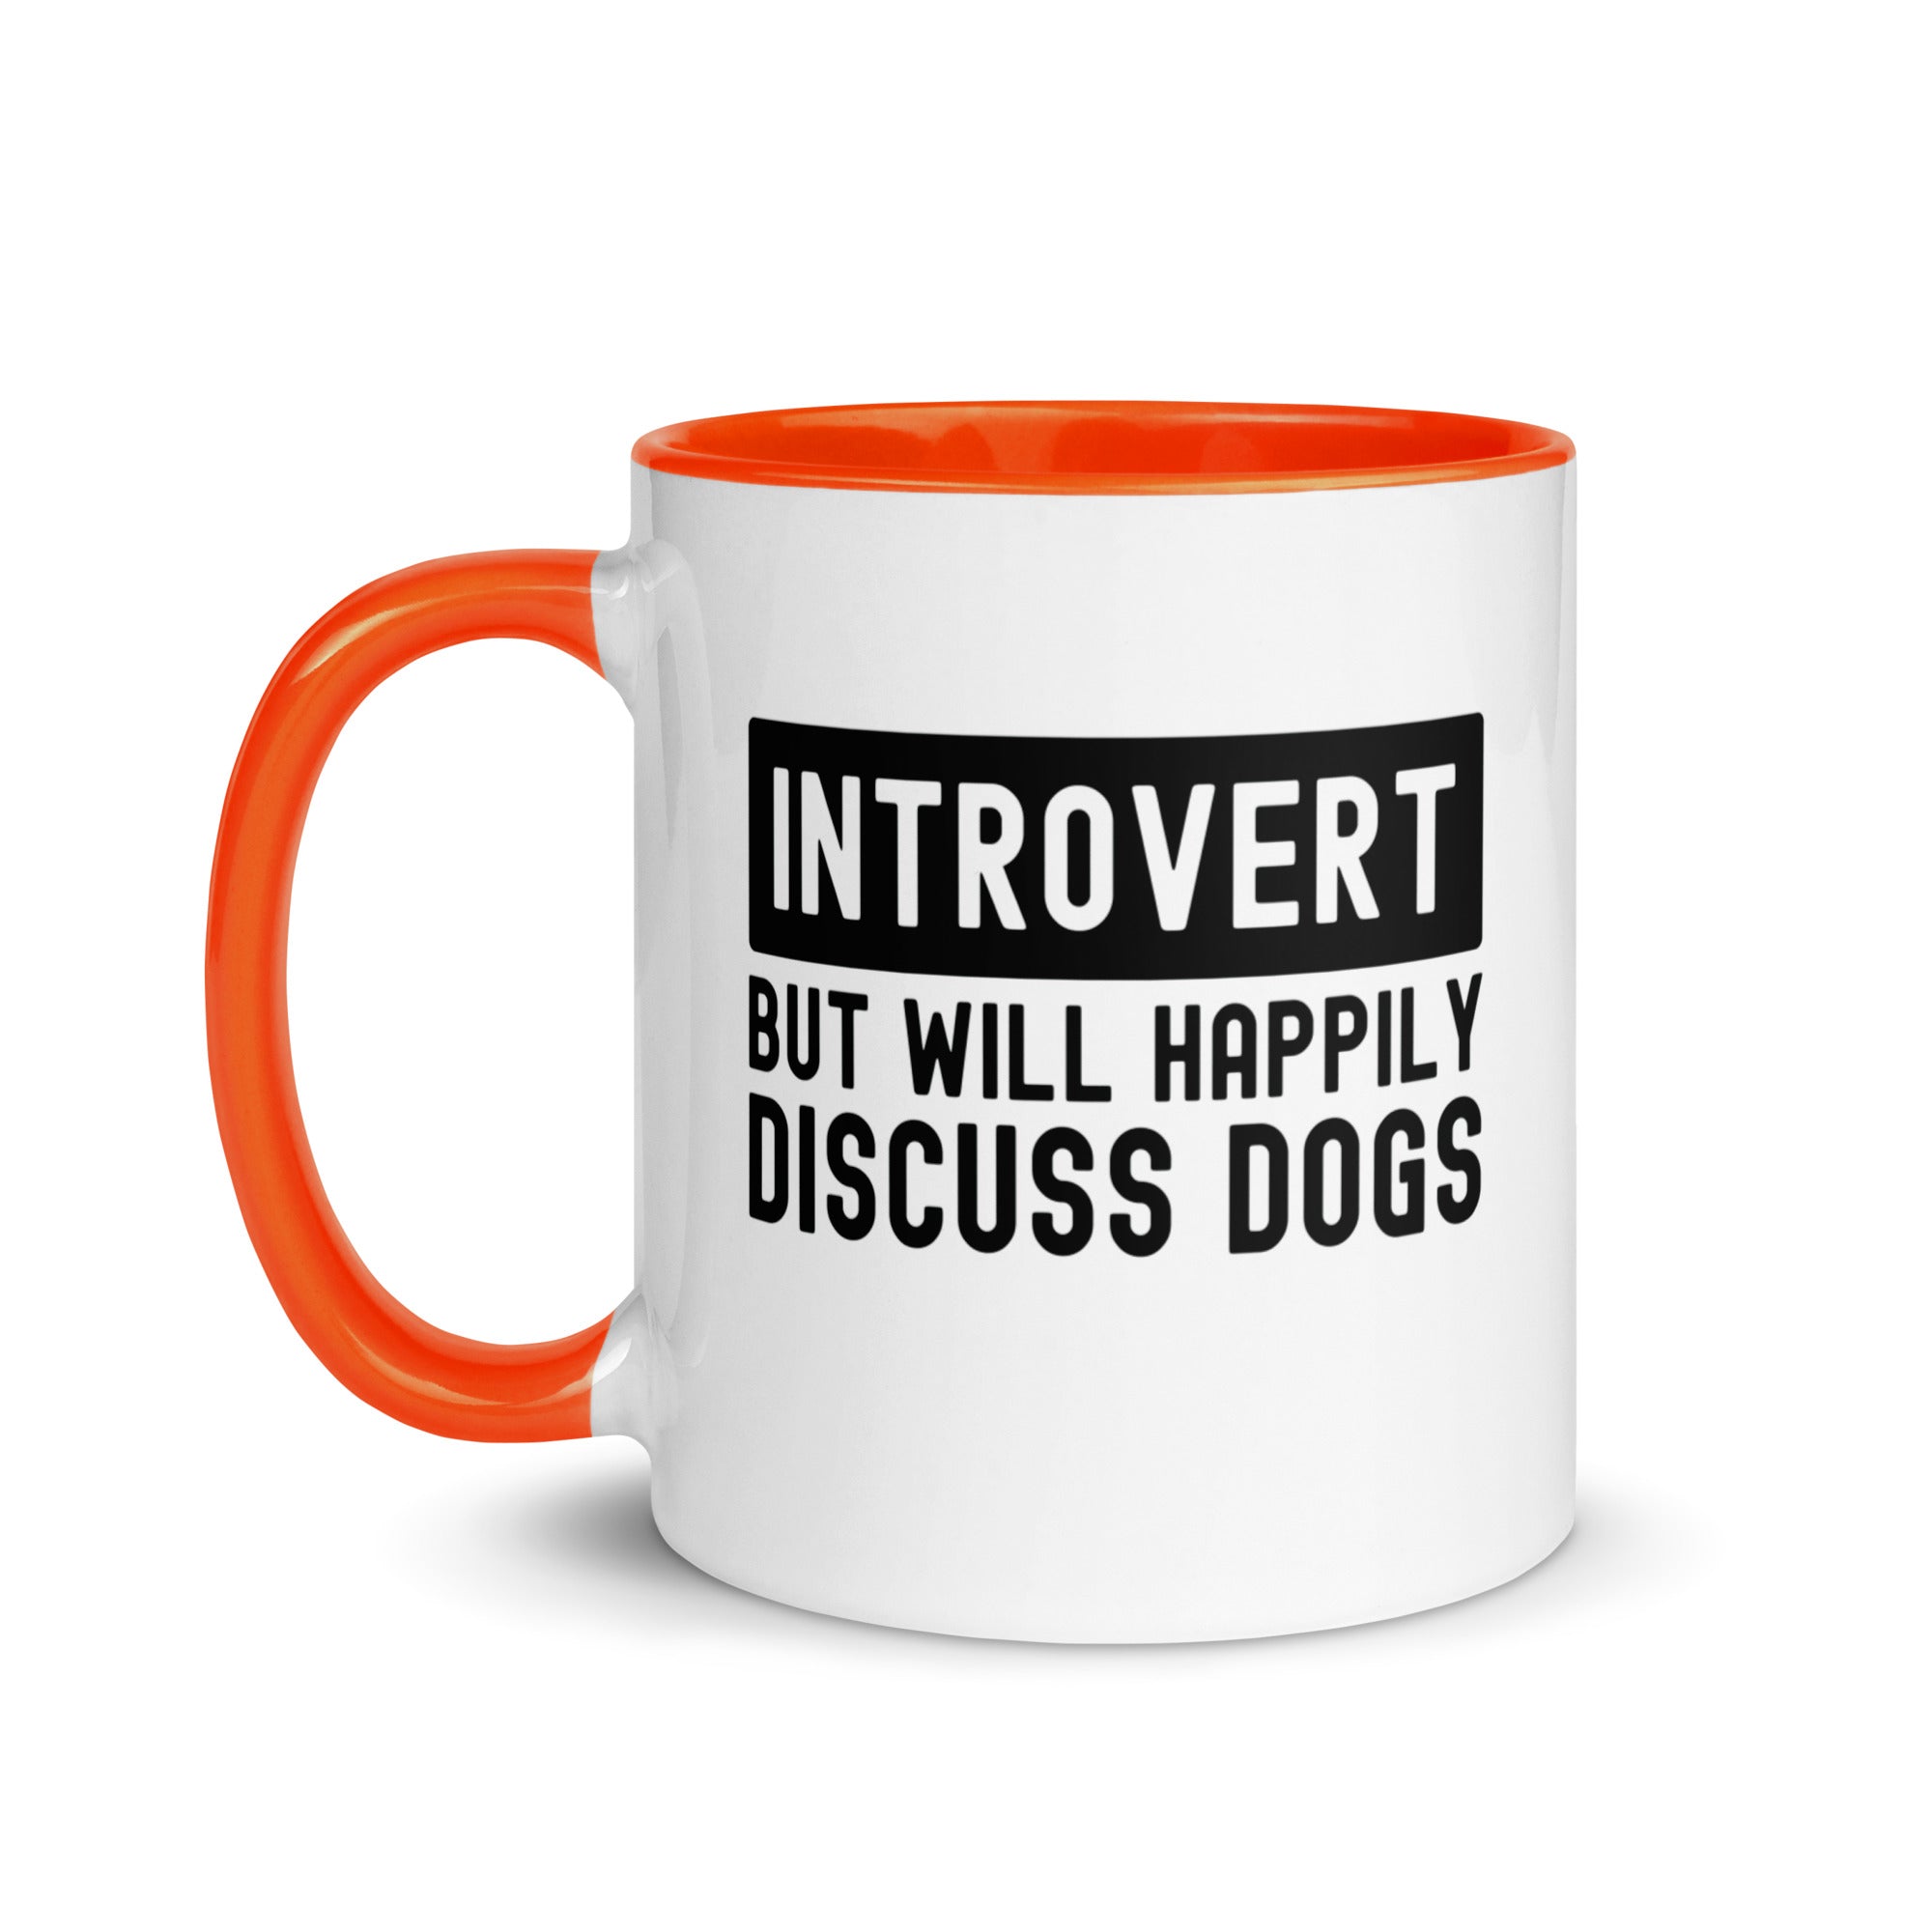 Mug with Color Inside | Introvert but will happily discuss dogs